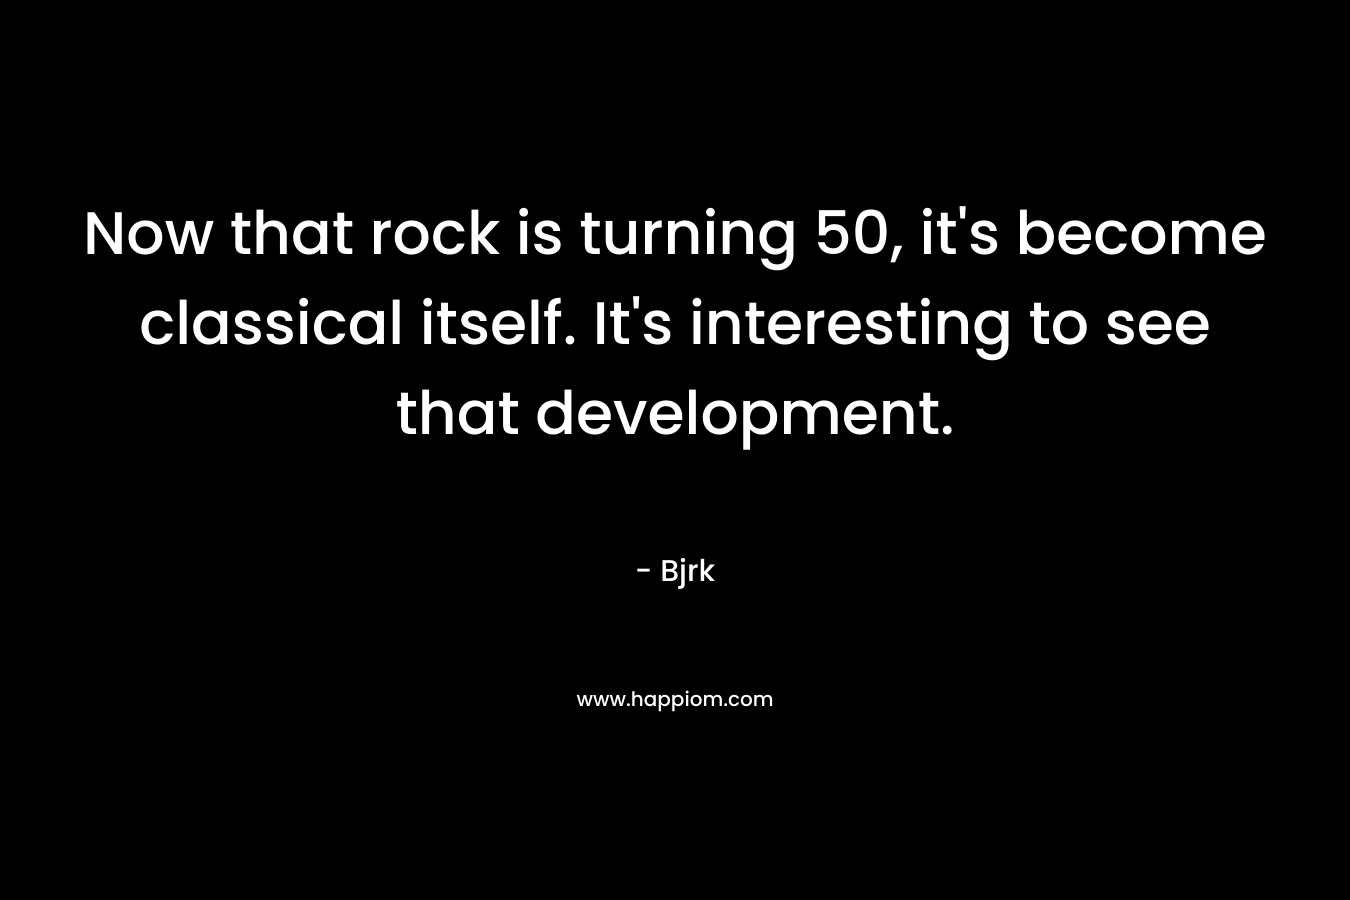 Now that rock is turning 50, it's become classical itself. It's interesting to see that development.